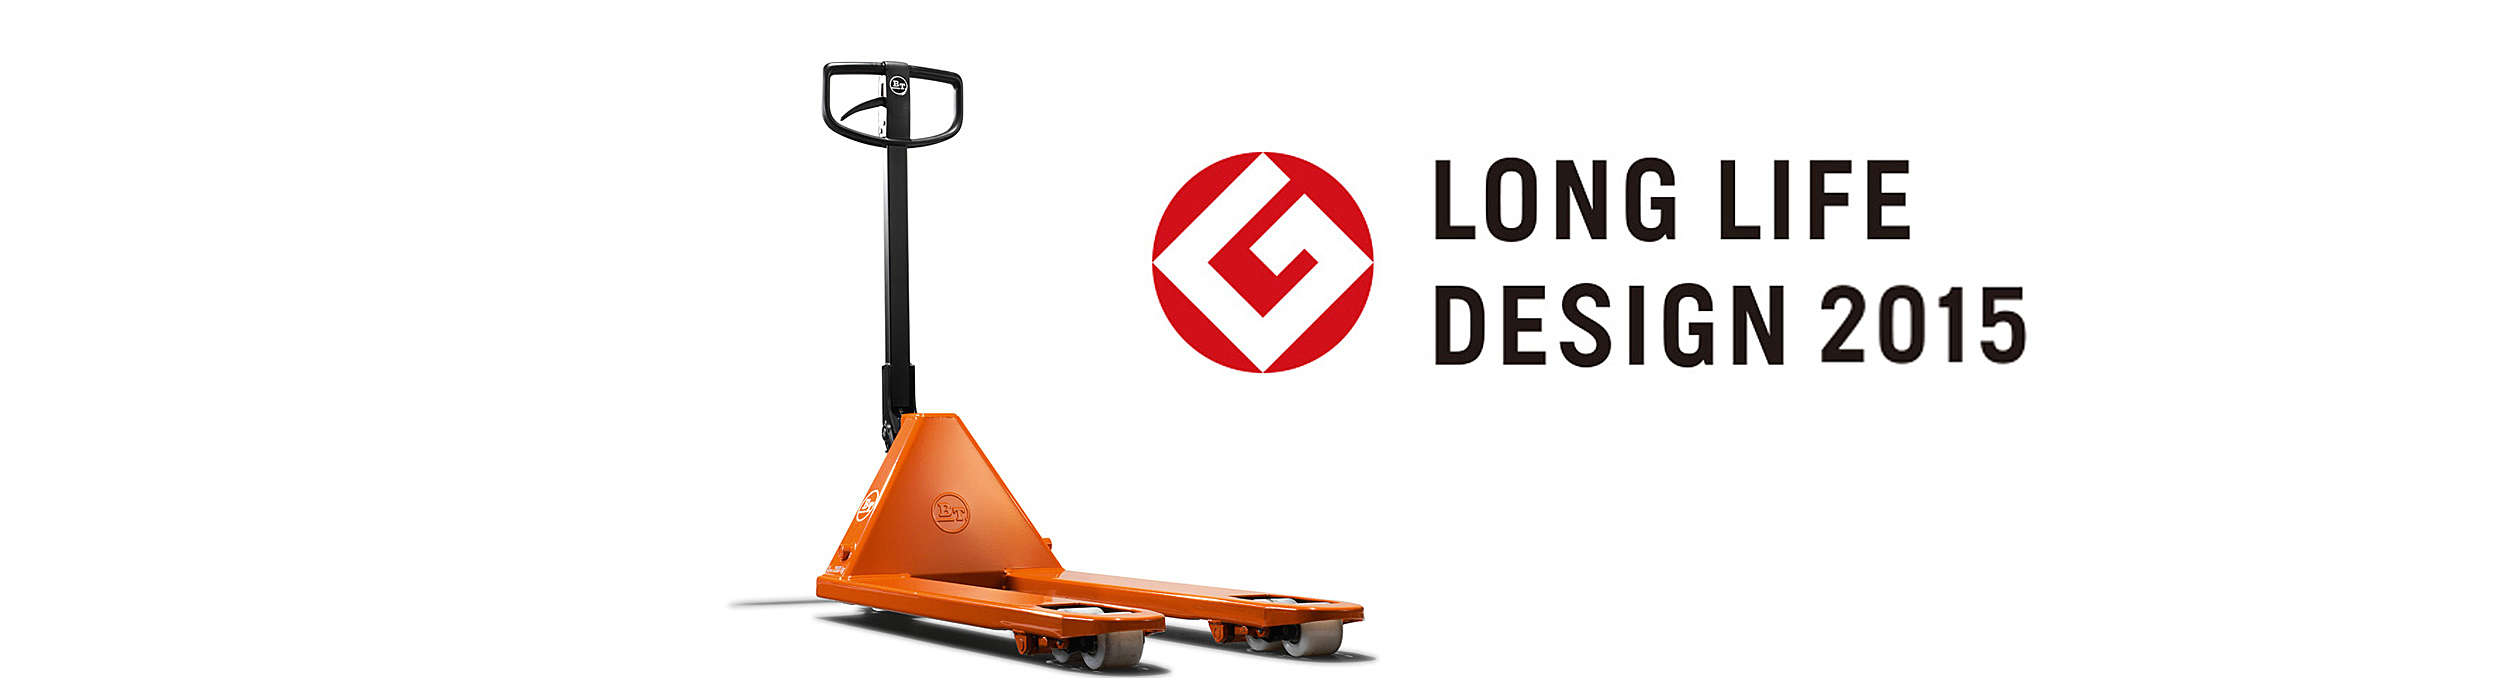 BT Lifter hand pallet truck with logo for Long Life Design